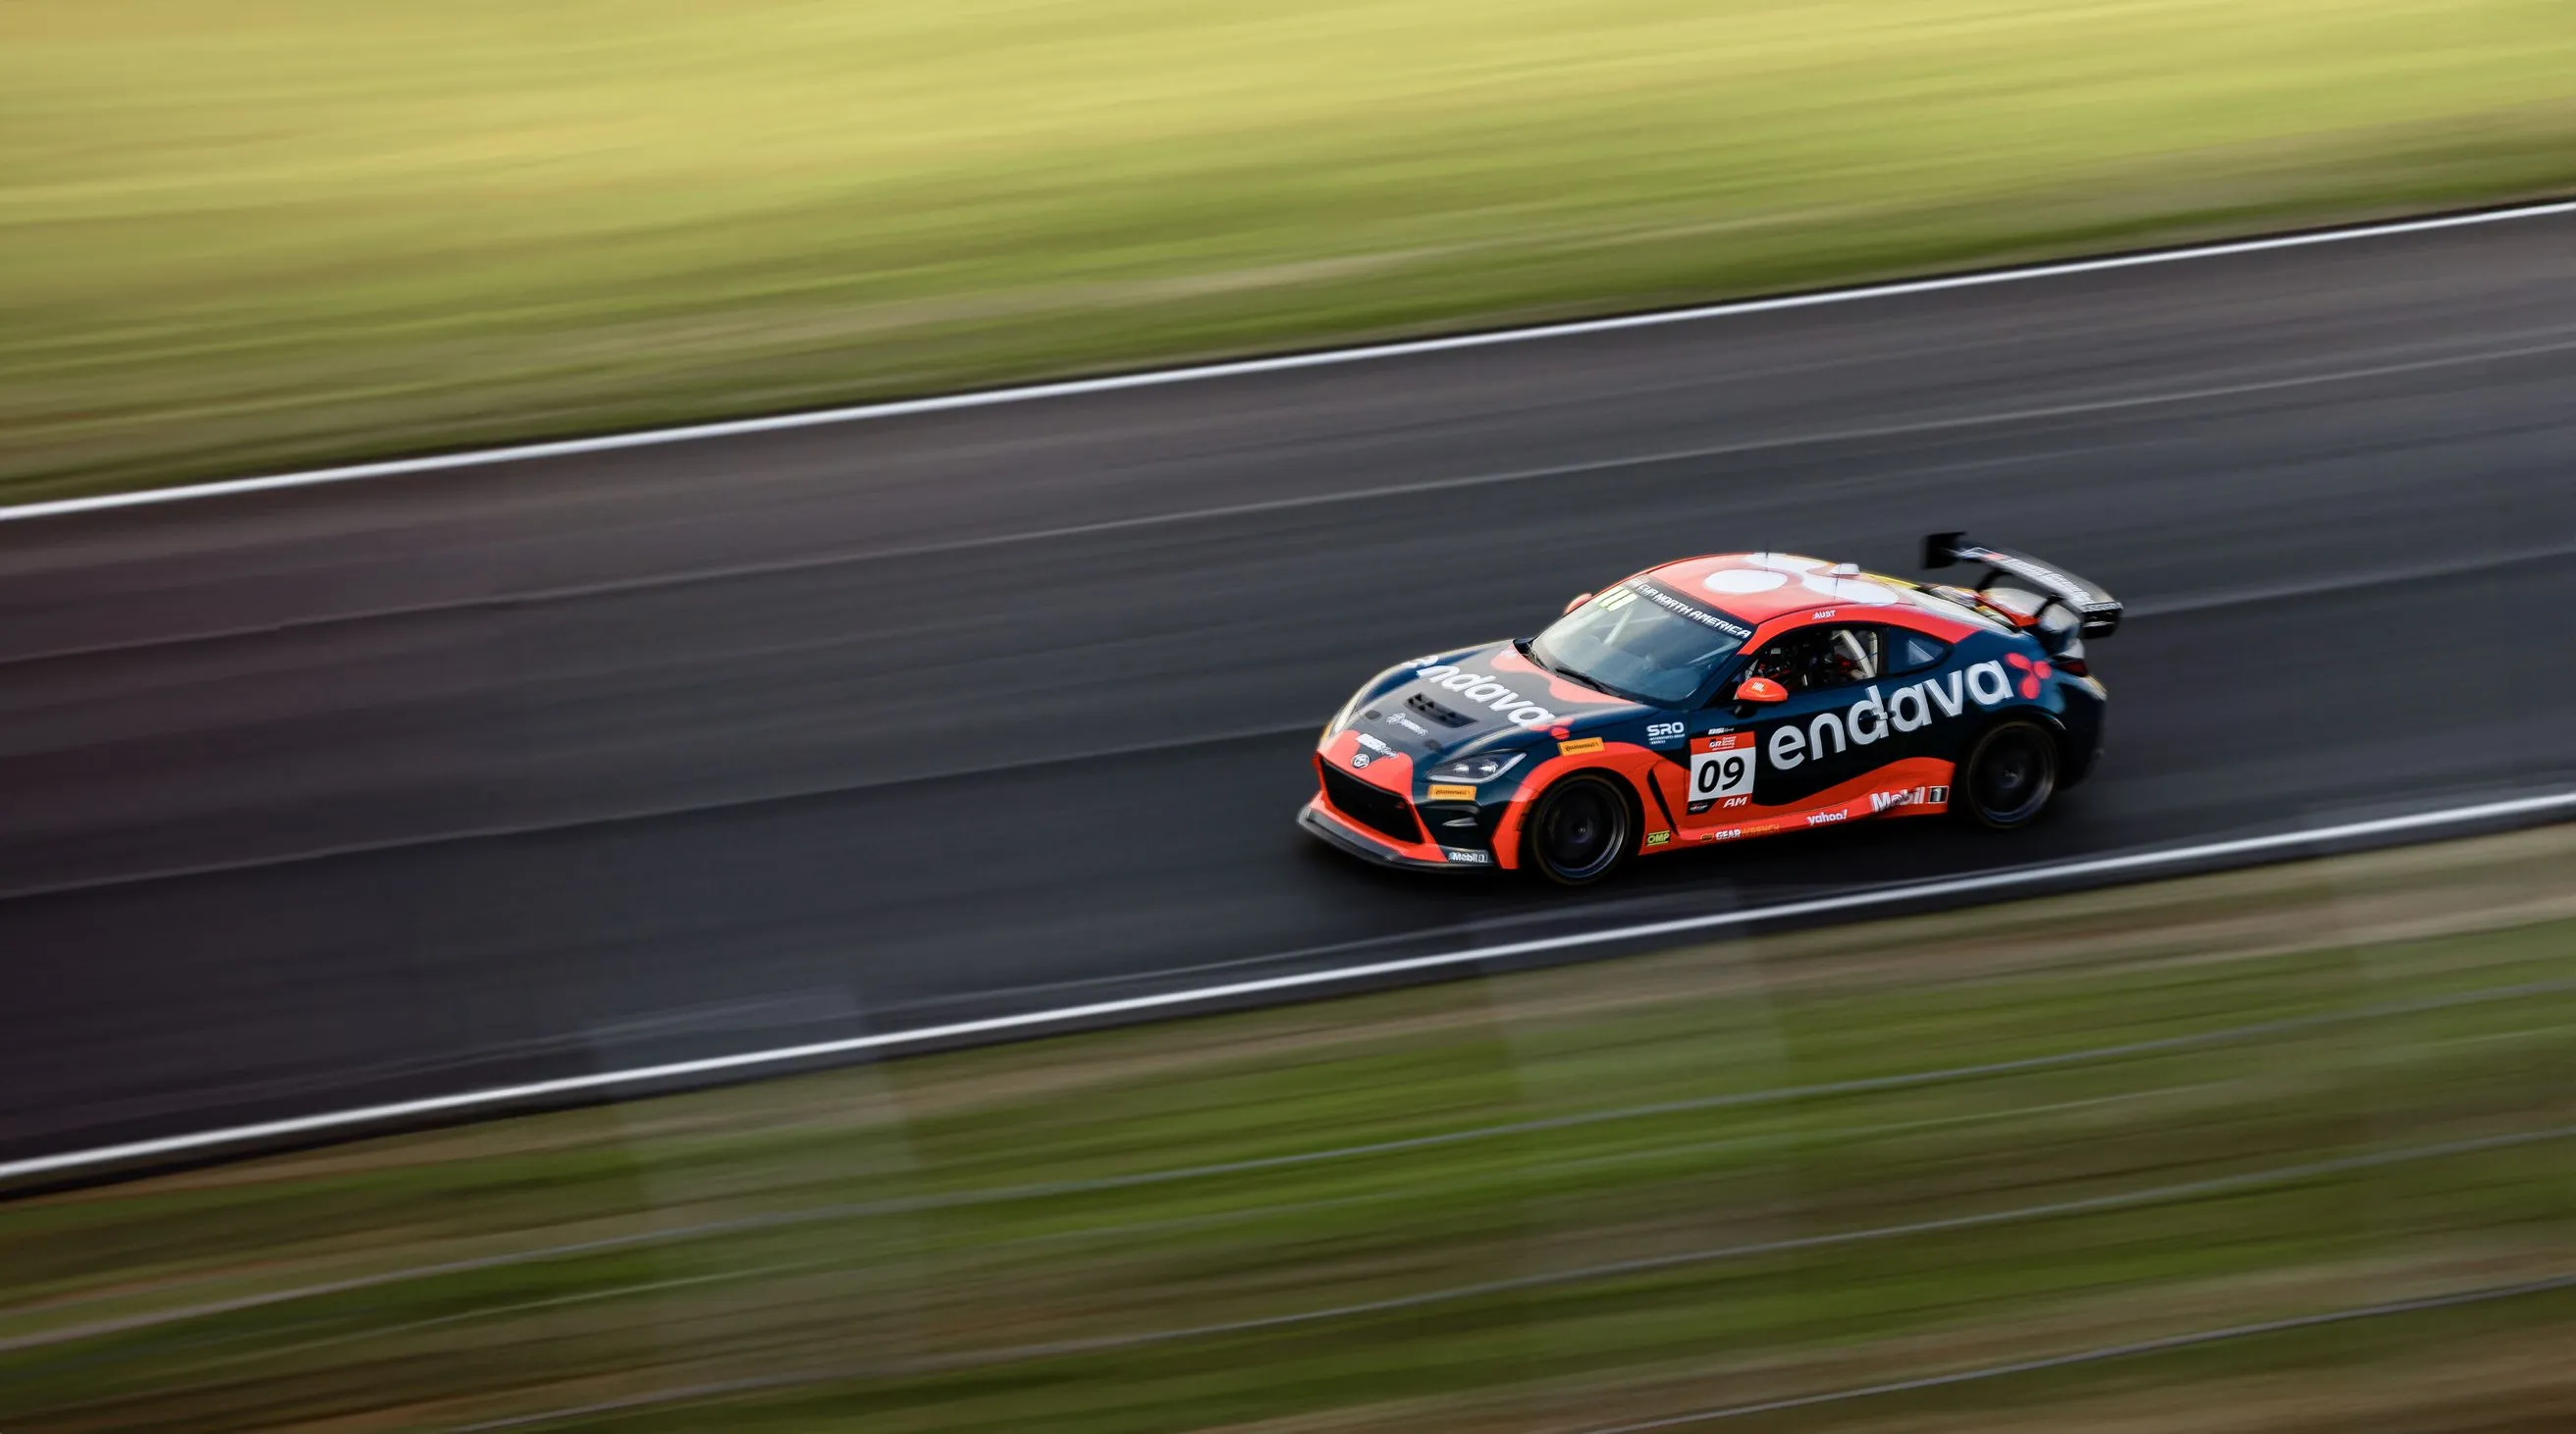 An Endava branded race car driving on the track.